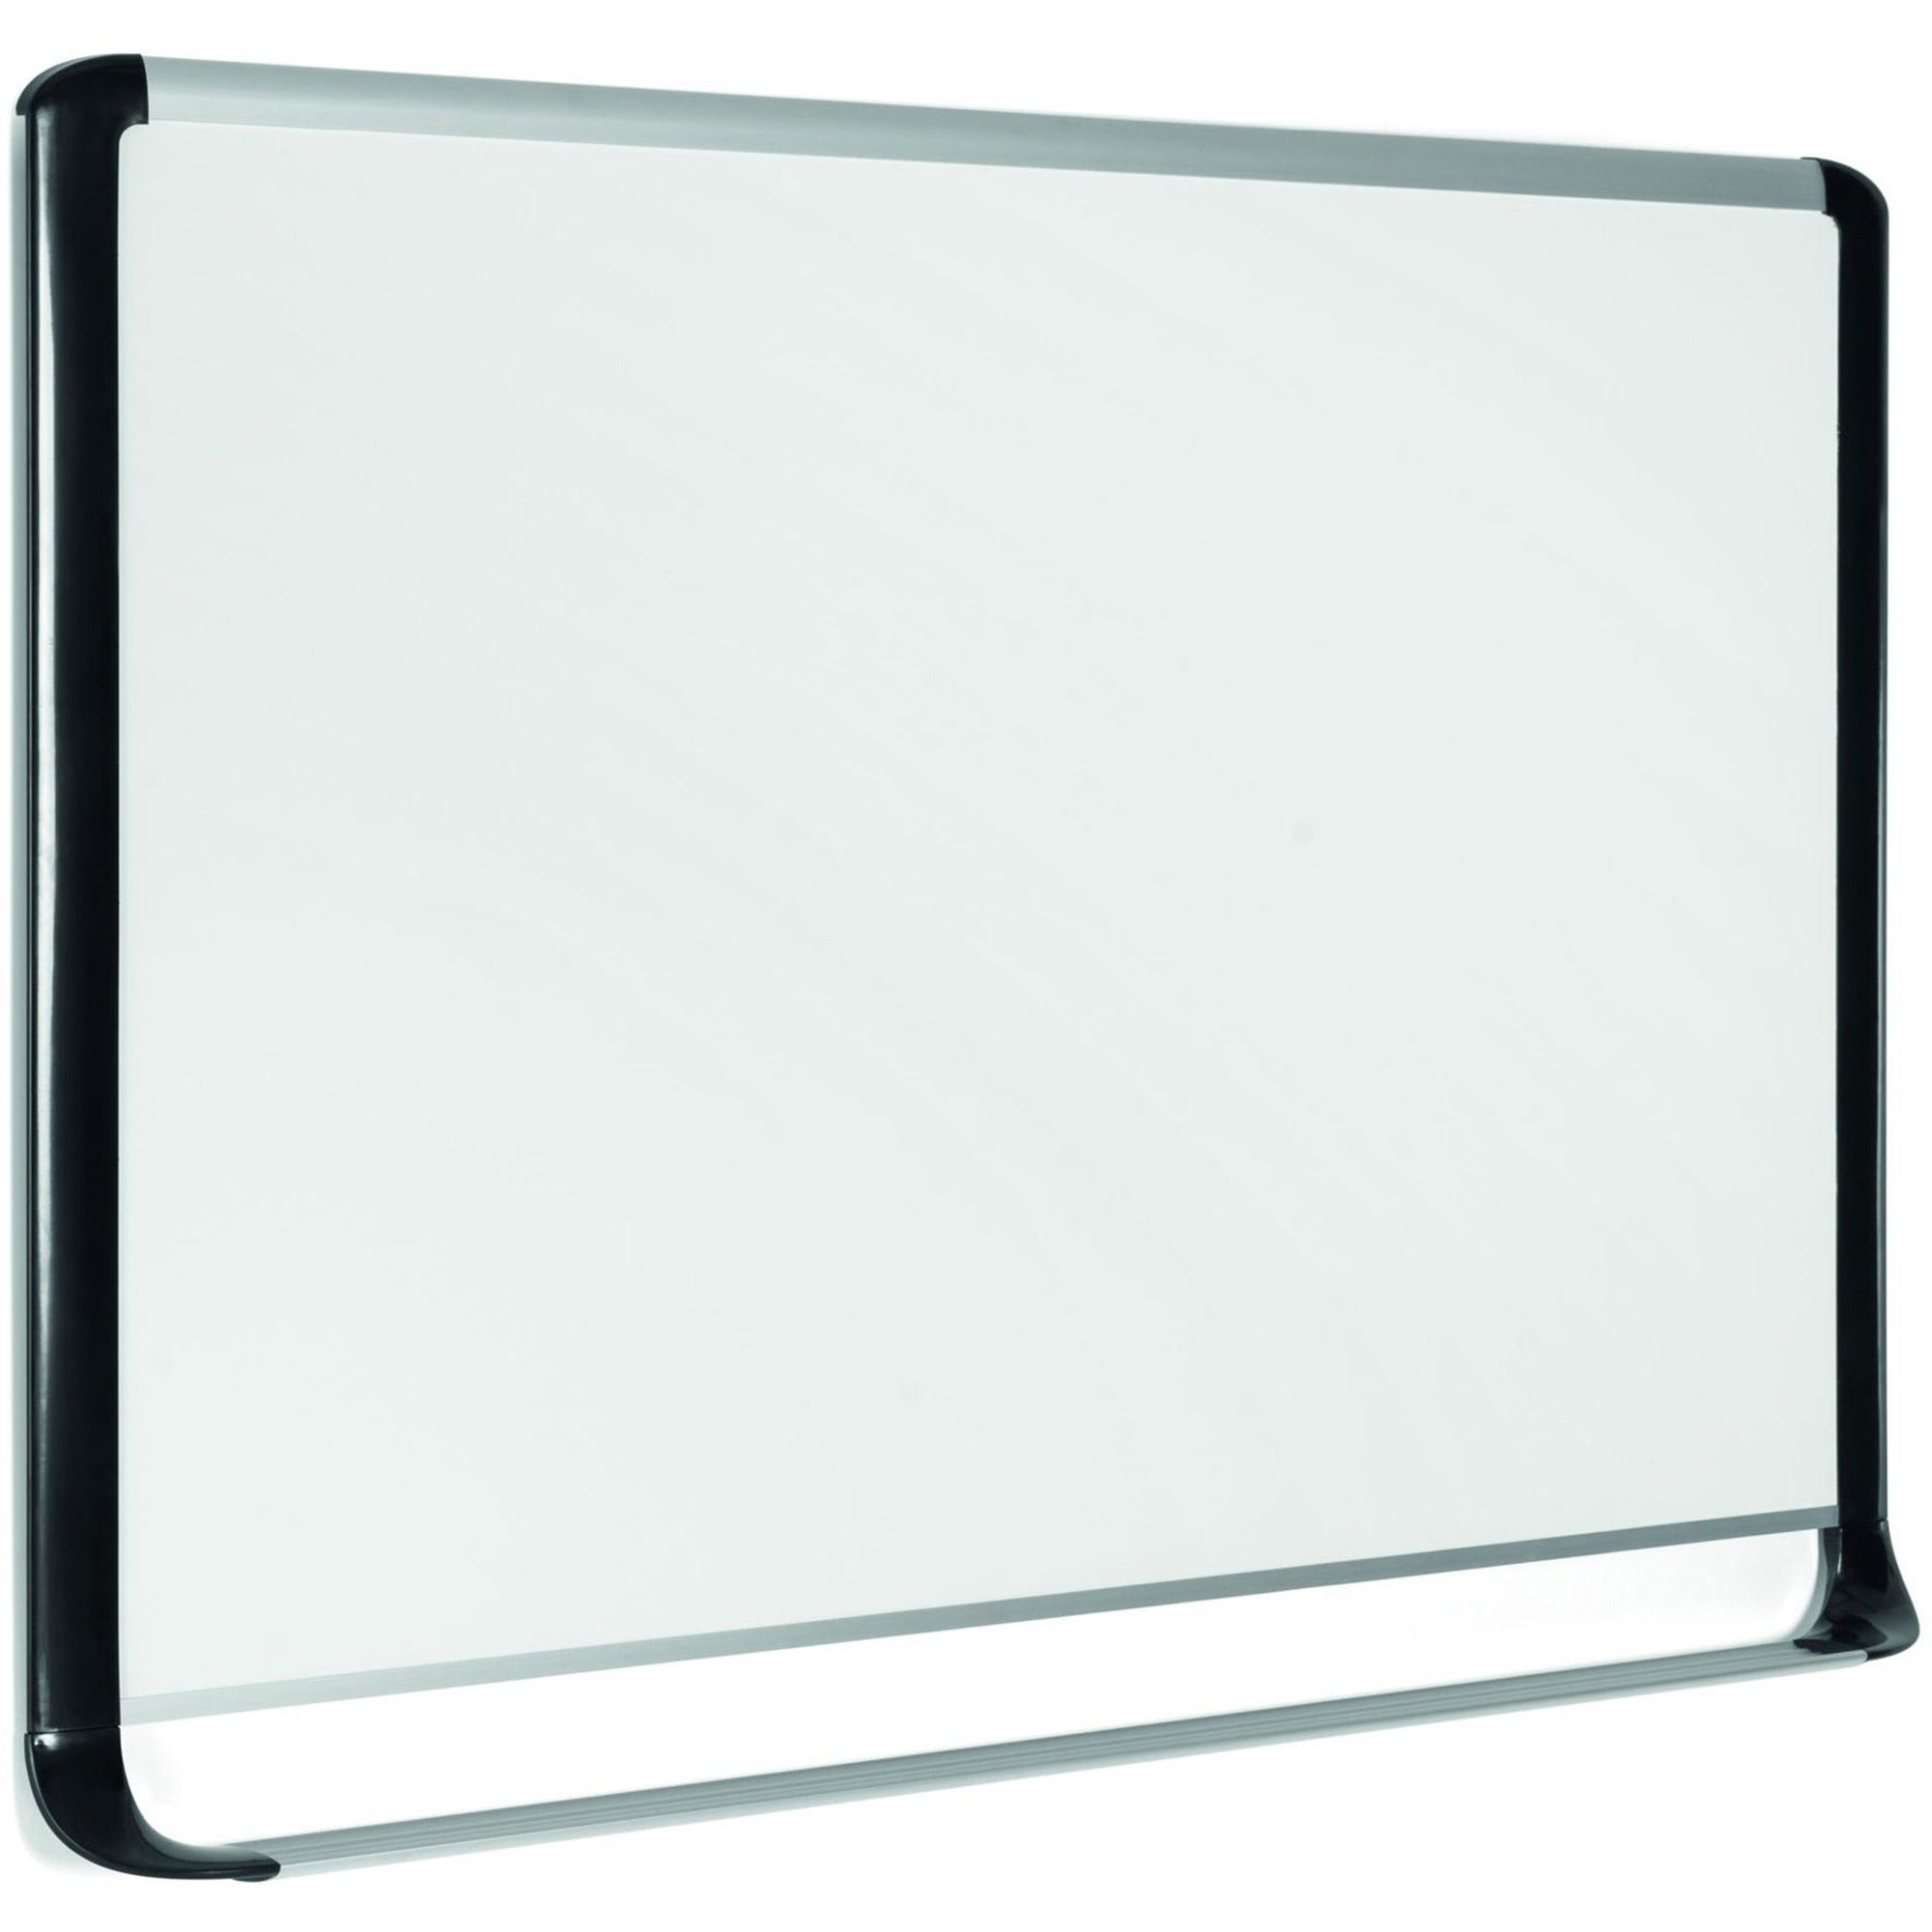 MasterVision MVI Platinum Plus Dry-erase Board - 36" (3 ft) Width x 24" (2 ft) Height - White Porcelain Surface - Silver/Black Aluminum/Plastic Frame - Rectangle - Magnetic - Scratch Resistant, Ghost Resistant, Marker Tray, Sturdy - Assembly Required - 